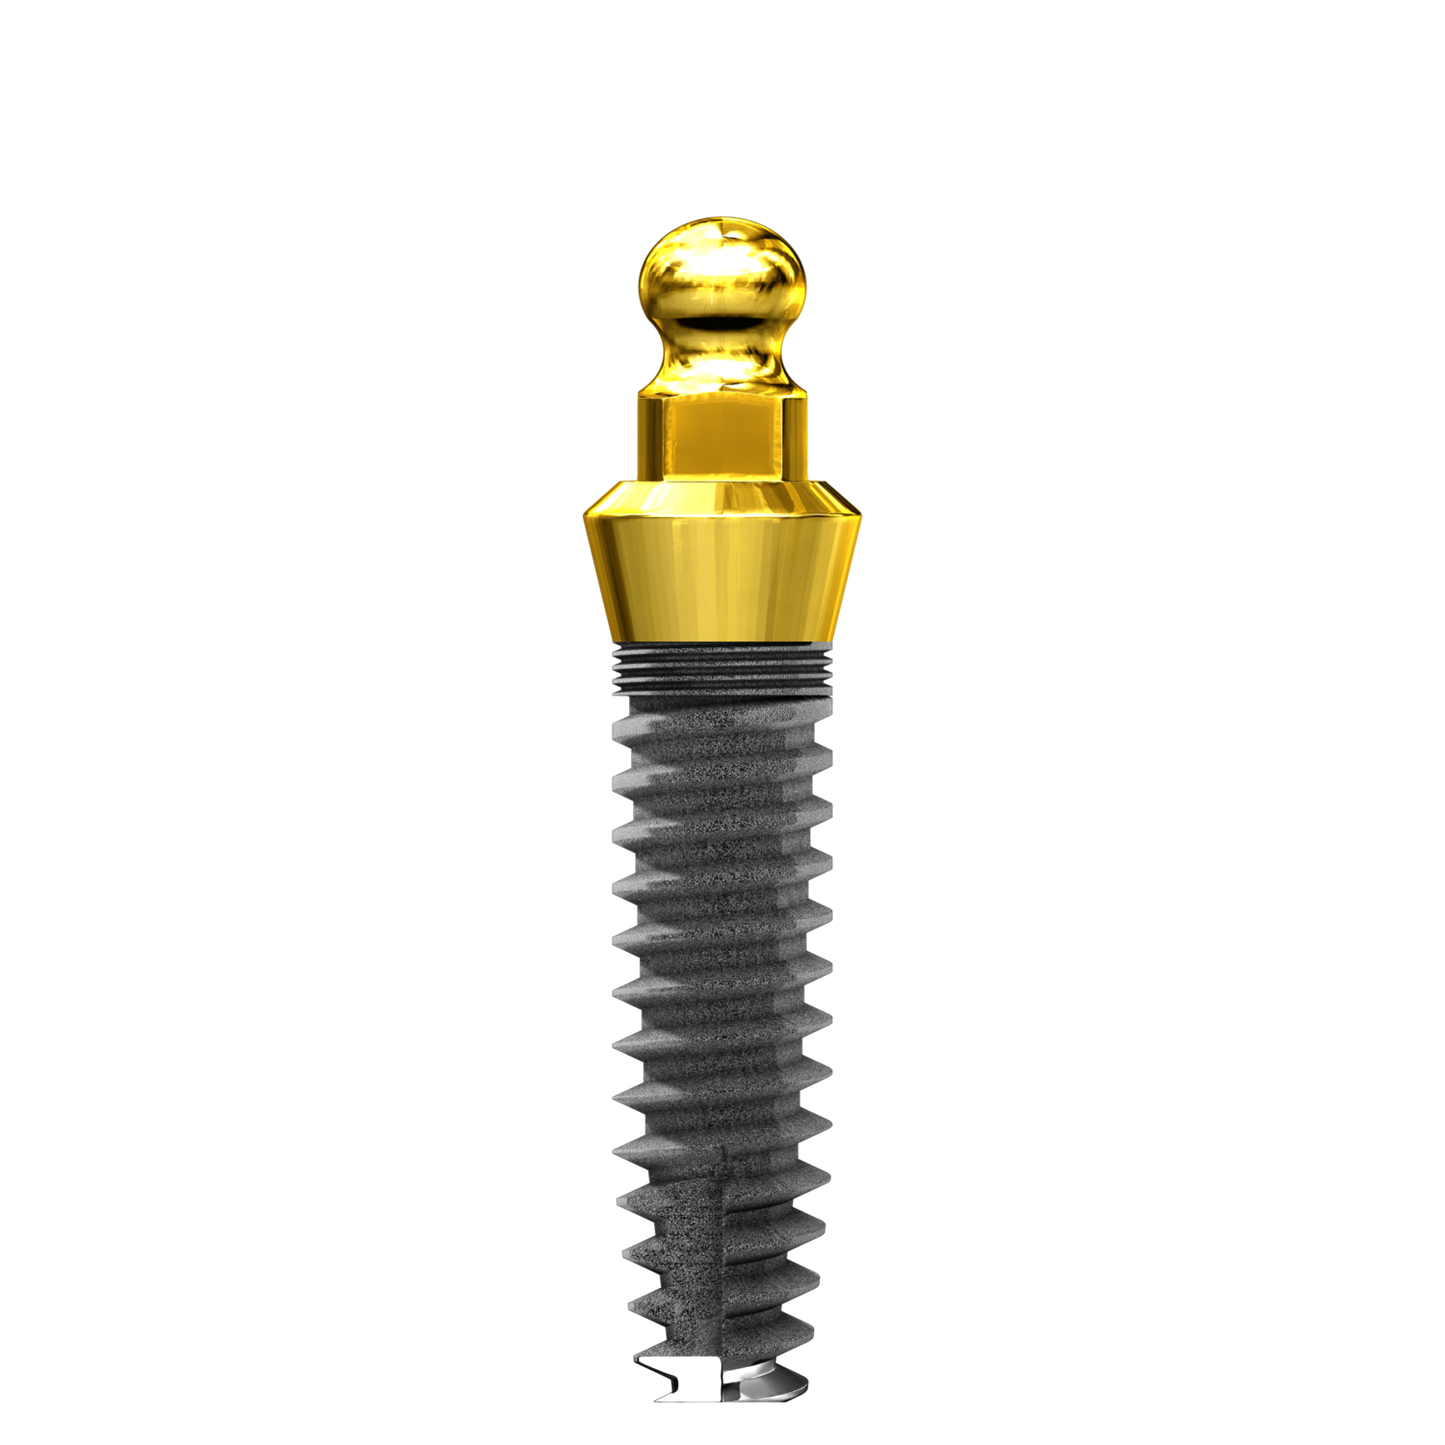 3.25mm x 8mm ISI C&B One Piece Implant